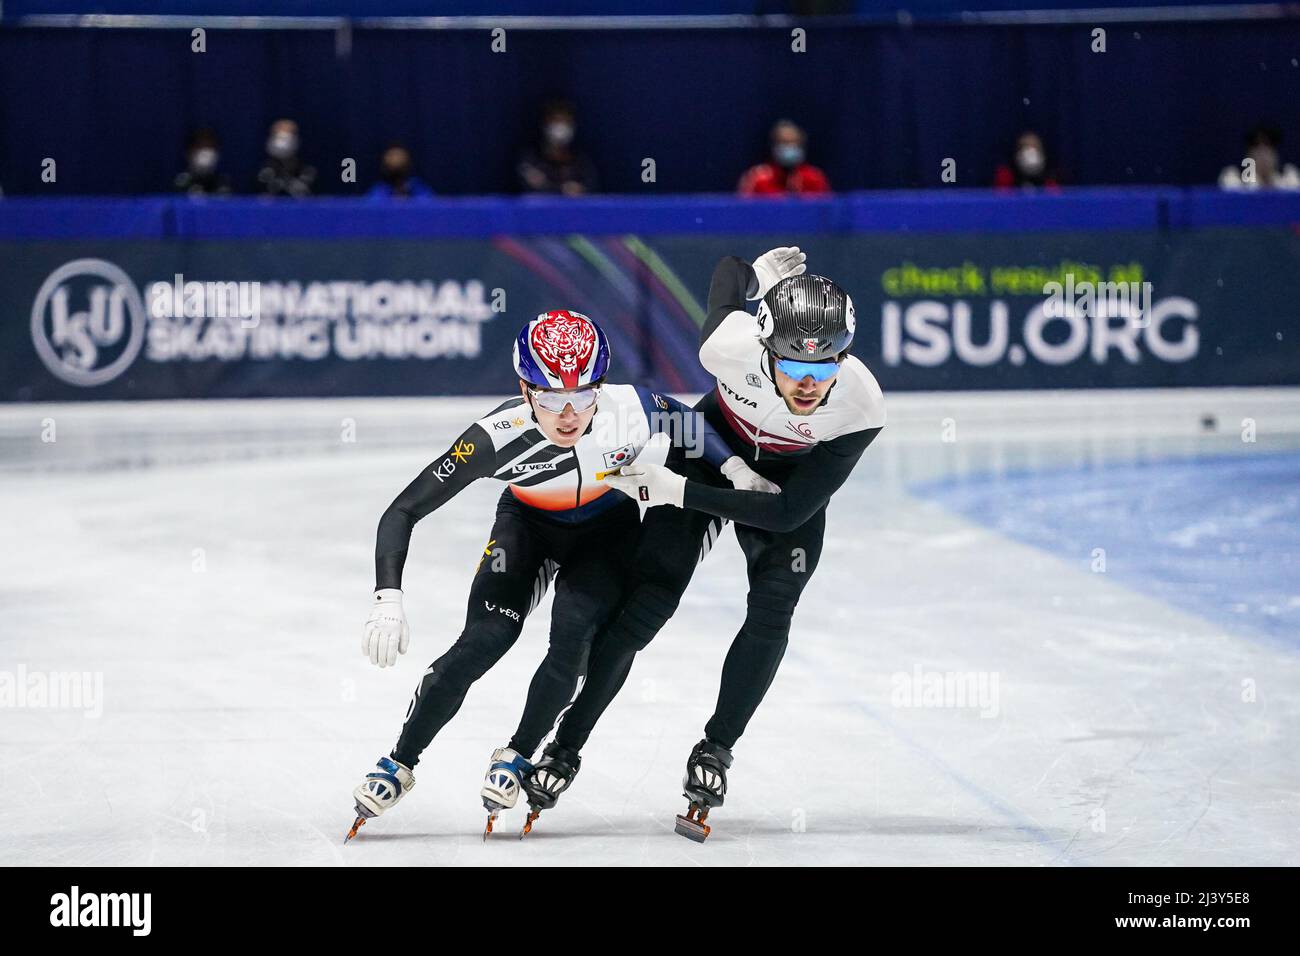 MONTREAL, CANADA - APRIL 10: Dongwook Kim of the Republic of Korea and Roberts Kruzbergs of Latvia during Day 3 of the ISU World Short Track Championships at the Maurice Richard Arena on April 10, 2022 in Montreal, Canada (Photo by Andre Weening/Orange Pictures) Stock Photo